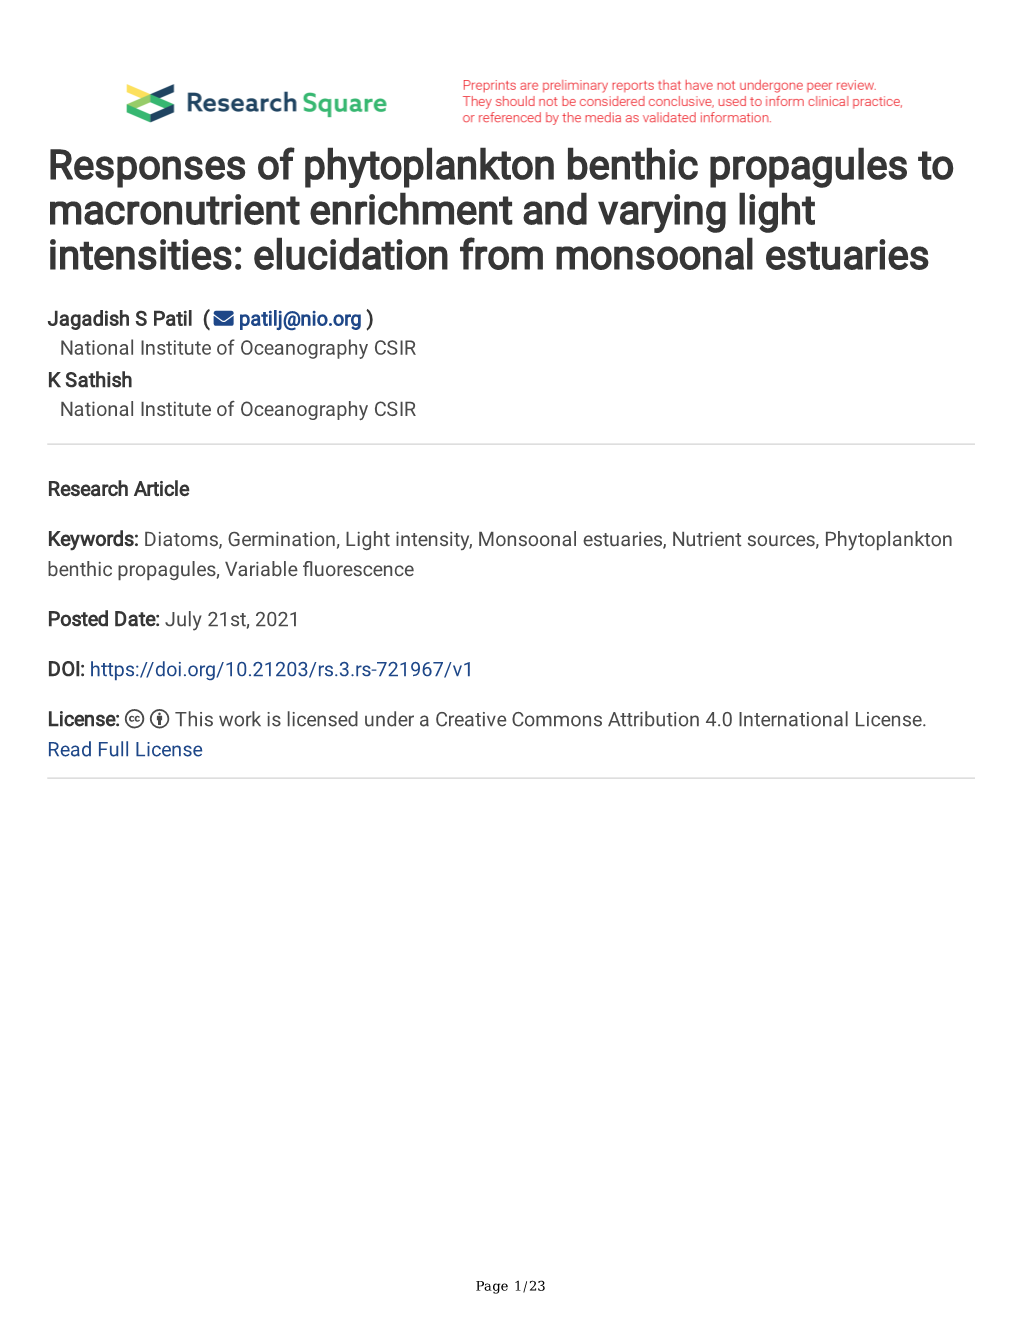 Responses of Phytoplankton Benthic Propagules to Macronutrient Enrichment and Varying Light Intensities: Elucidation from Monsoonal Estuaries